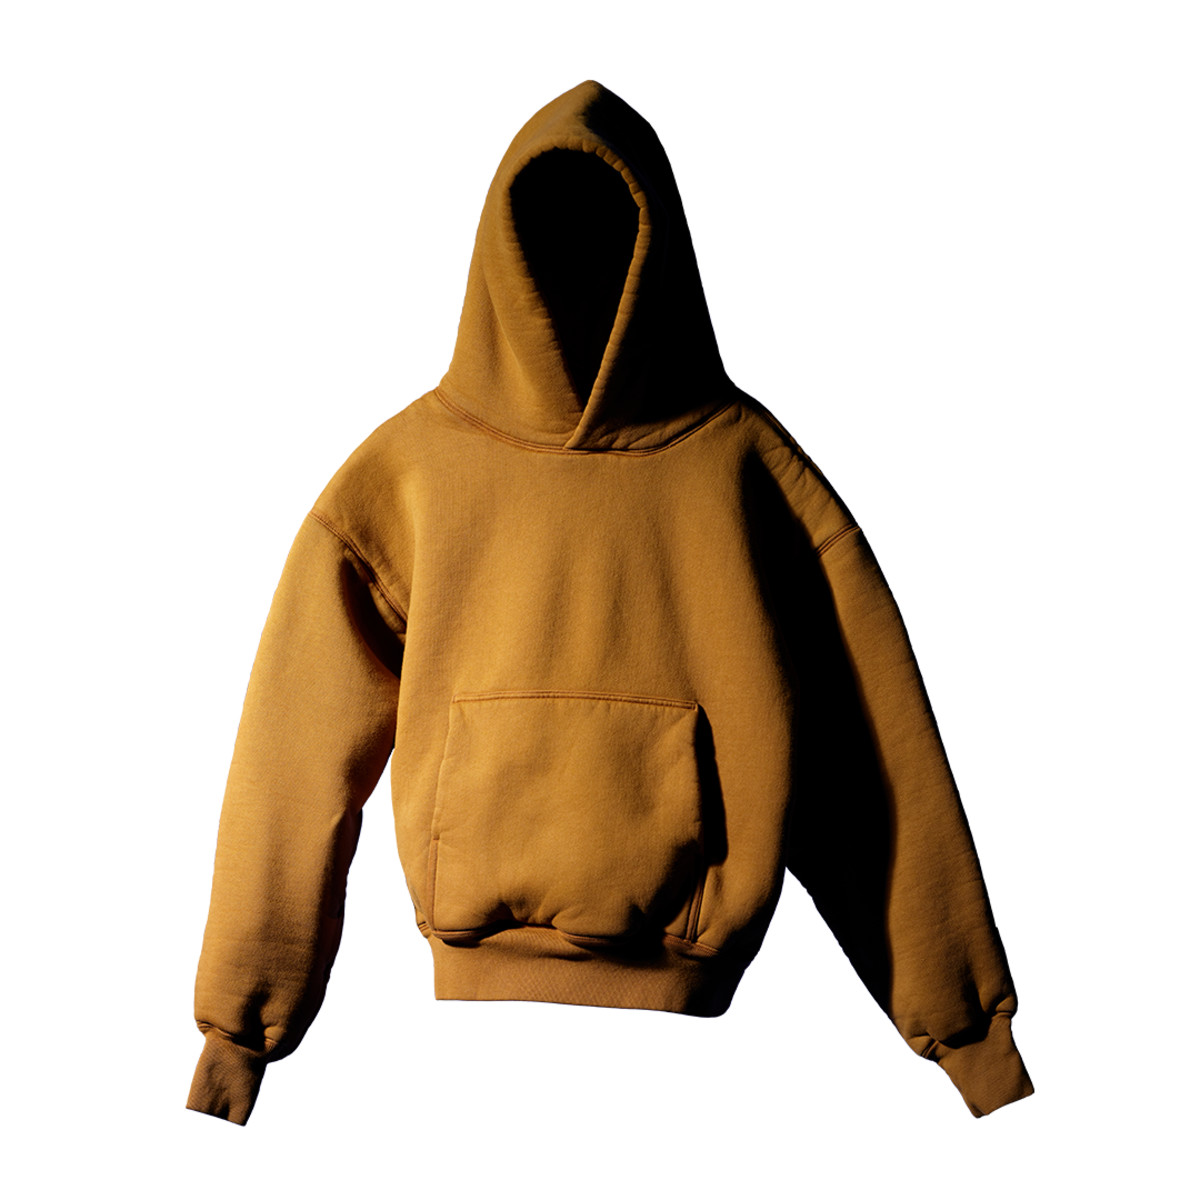 People Share First Thoughts After Receiving Kanye’s Yeezy x Gap Hoodie ...